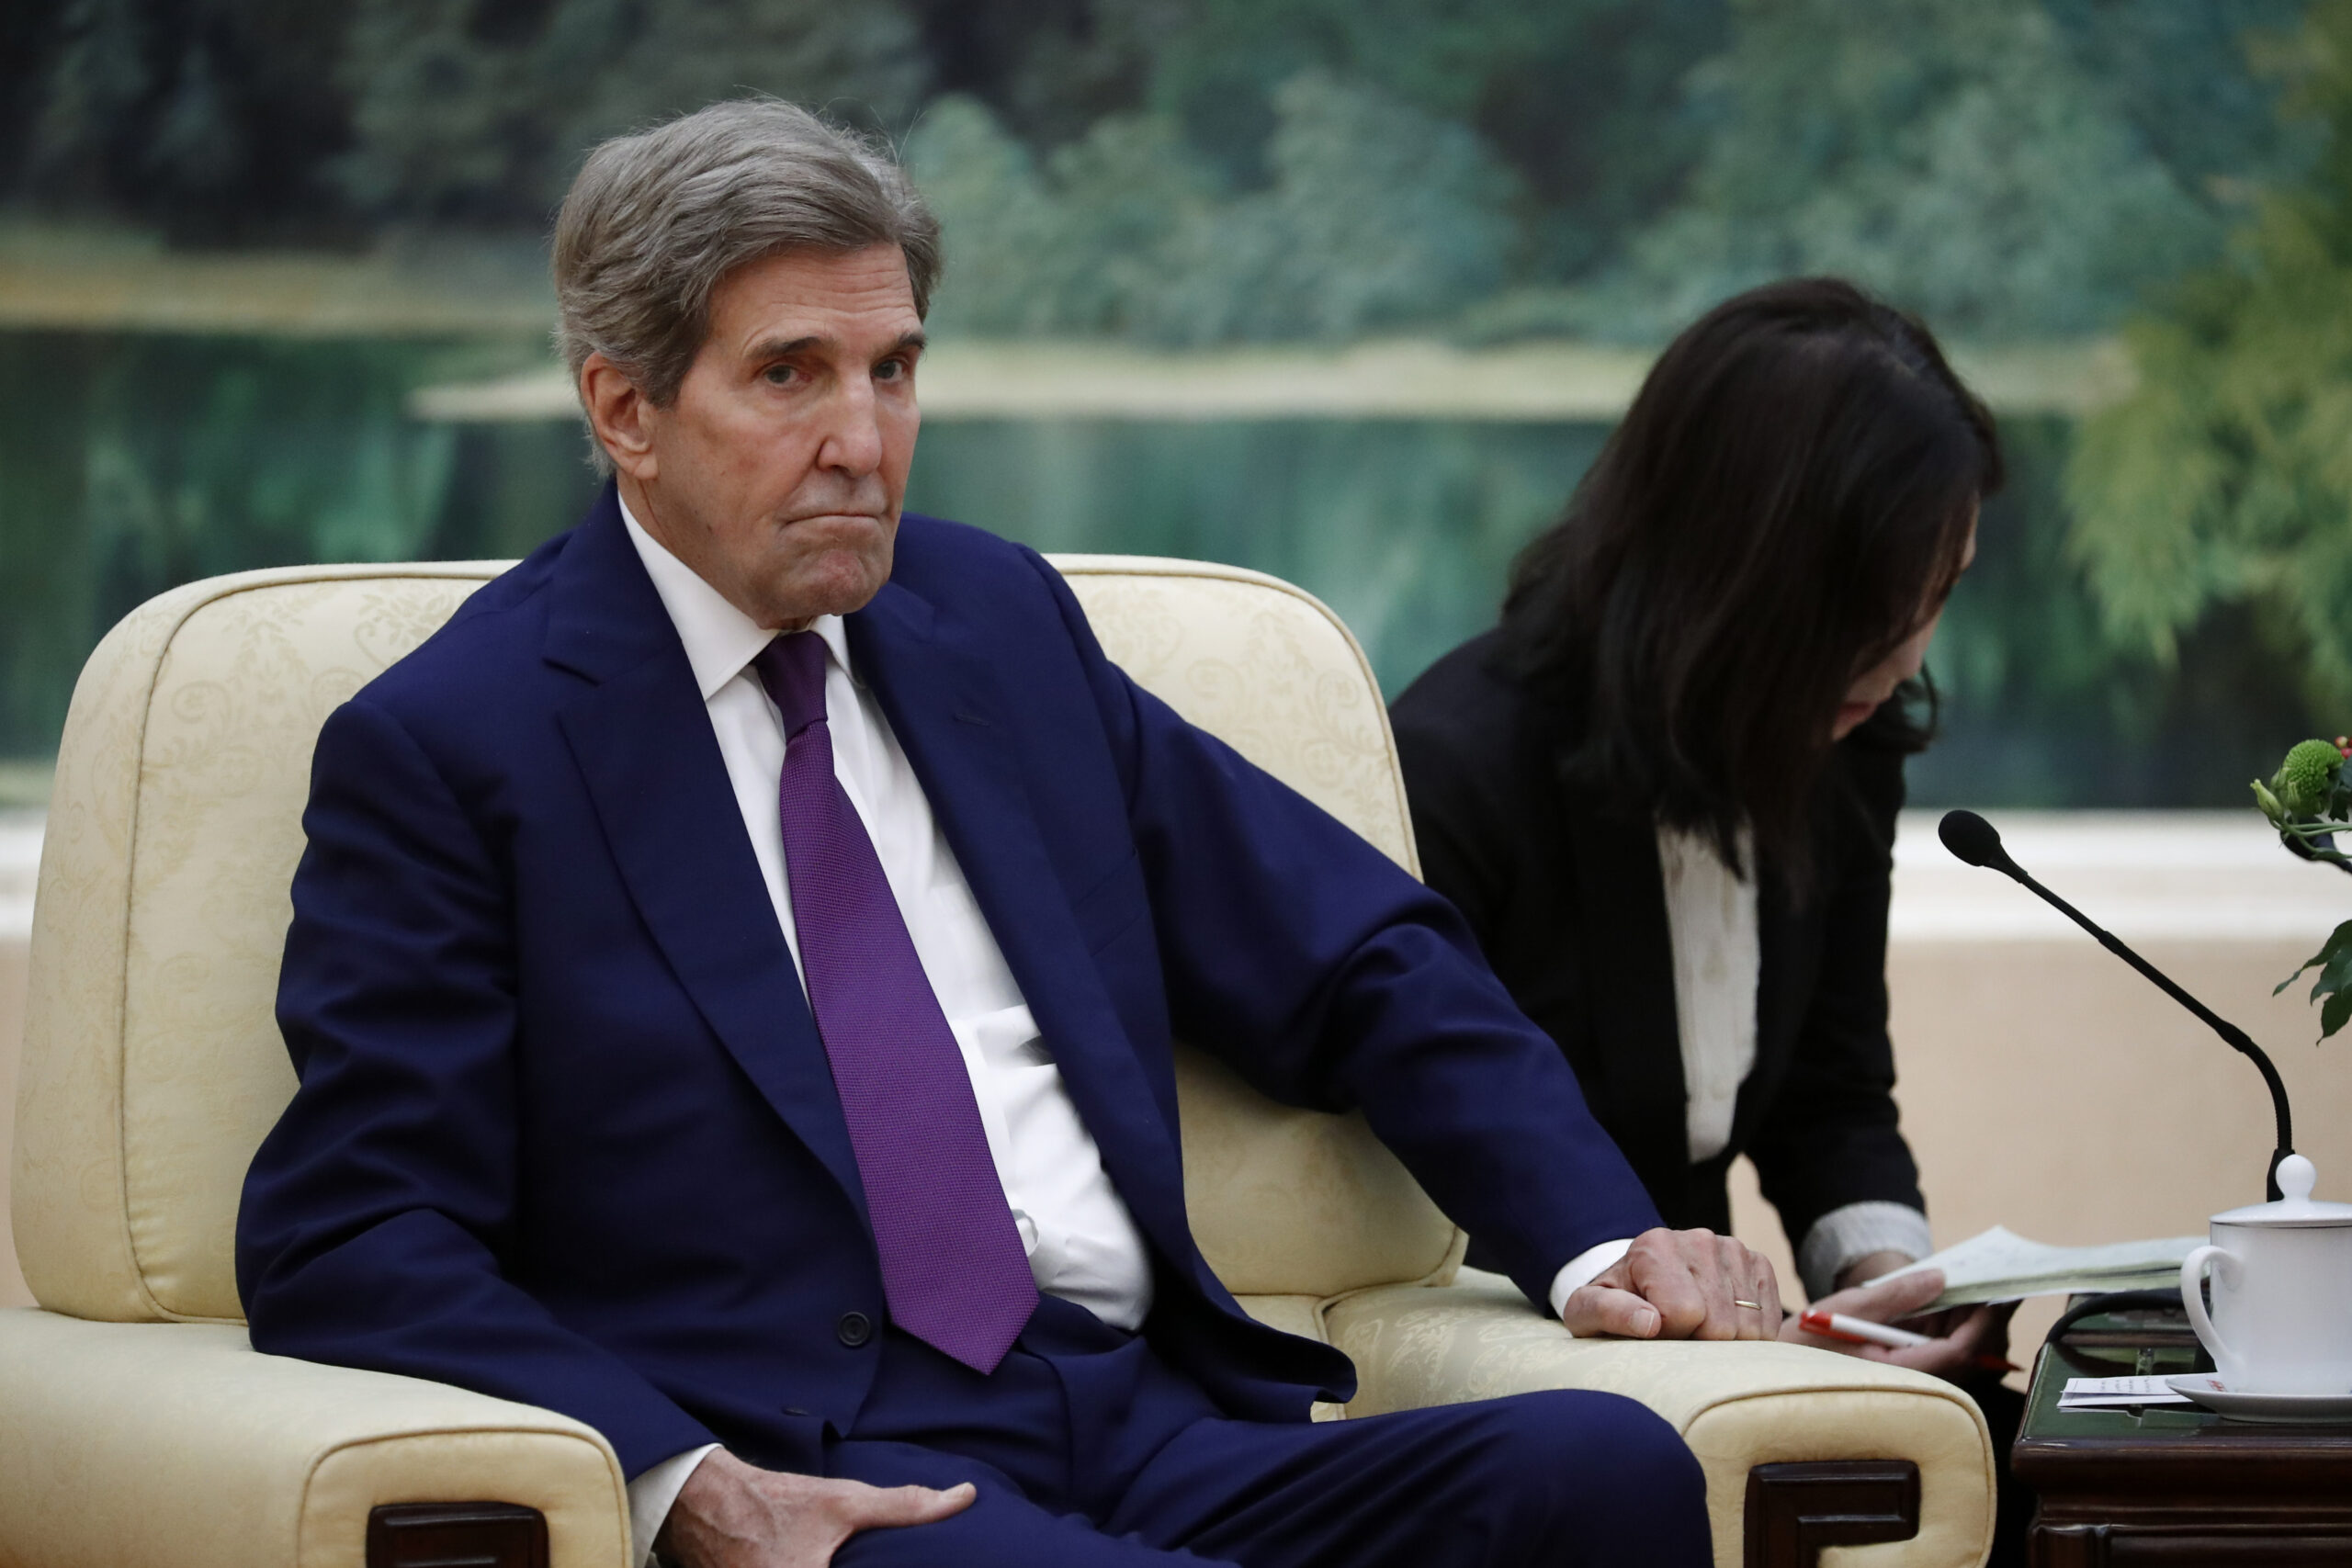 Kerry’s effort to secure climate deal with China falls short